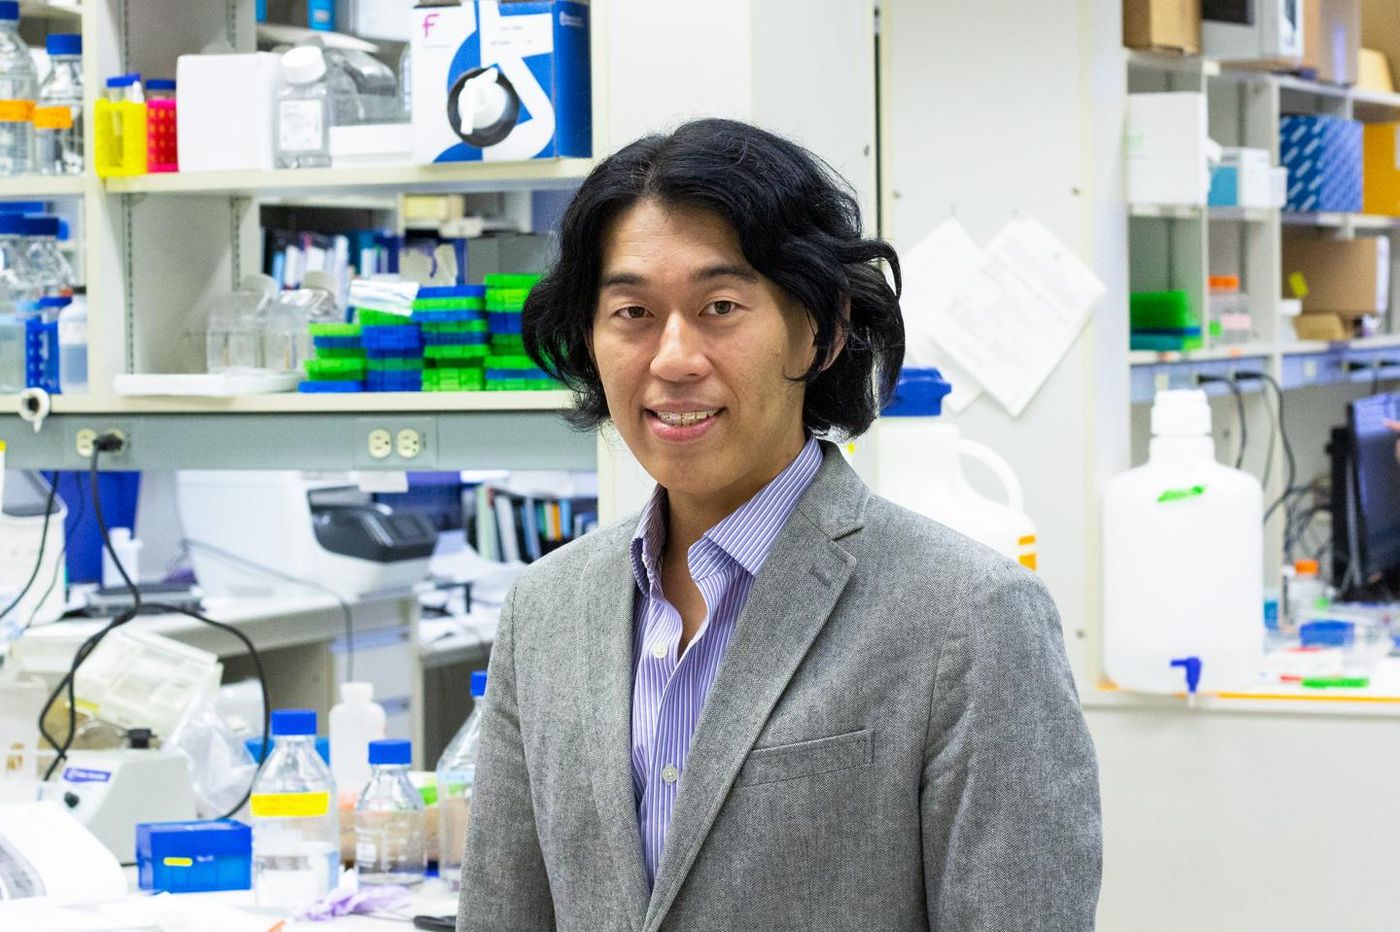 U of A medical geneticist Toshifumi Yokota is testing a new treatment for Duchenne muscular dystrophy that acts like a stitch to repair a genetic mutation in patients with the debilitating disease. / Credit: Jordan Carson